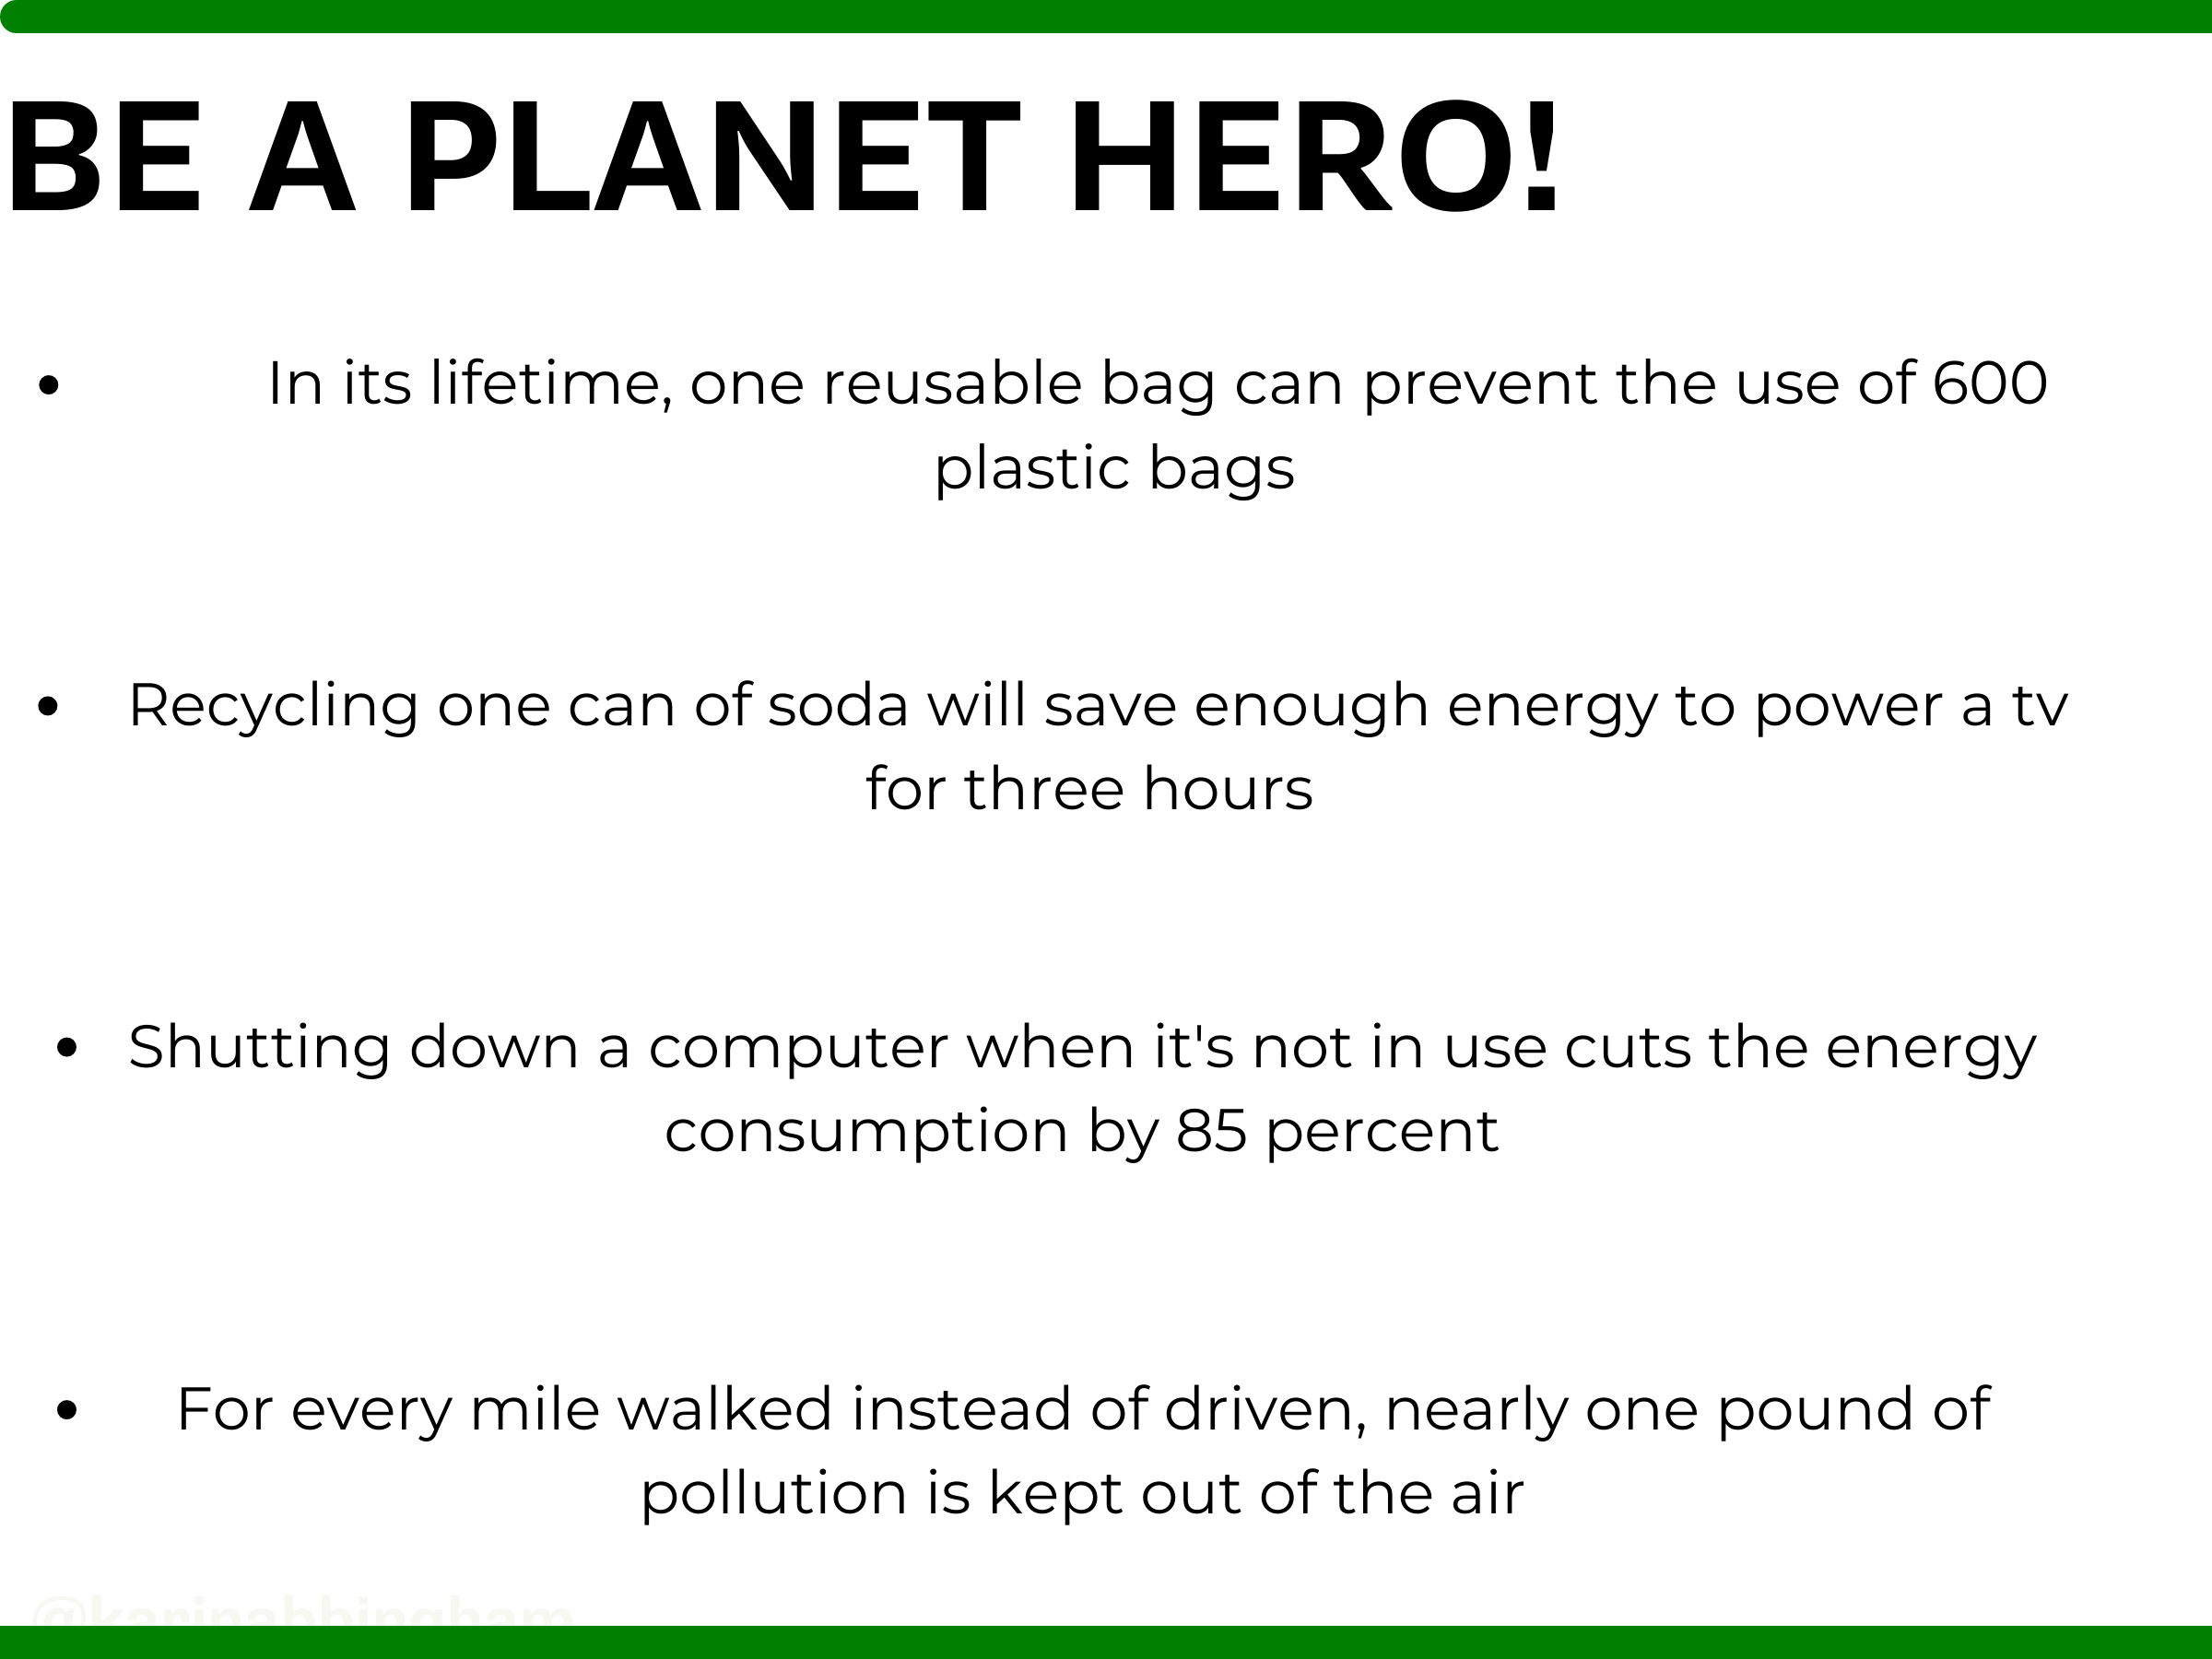 Be a Planet Hero Earth Day 